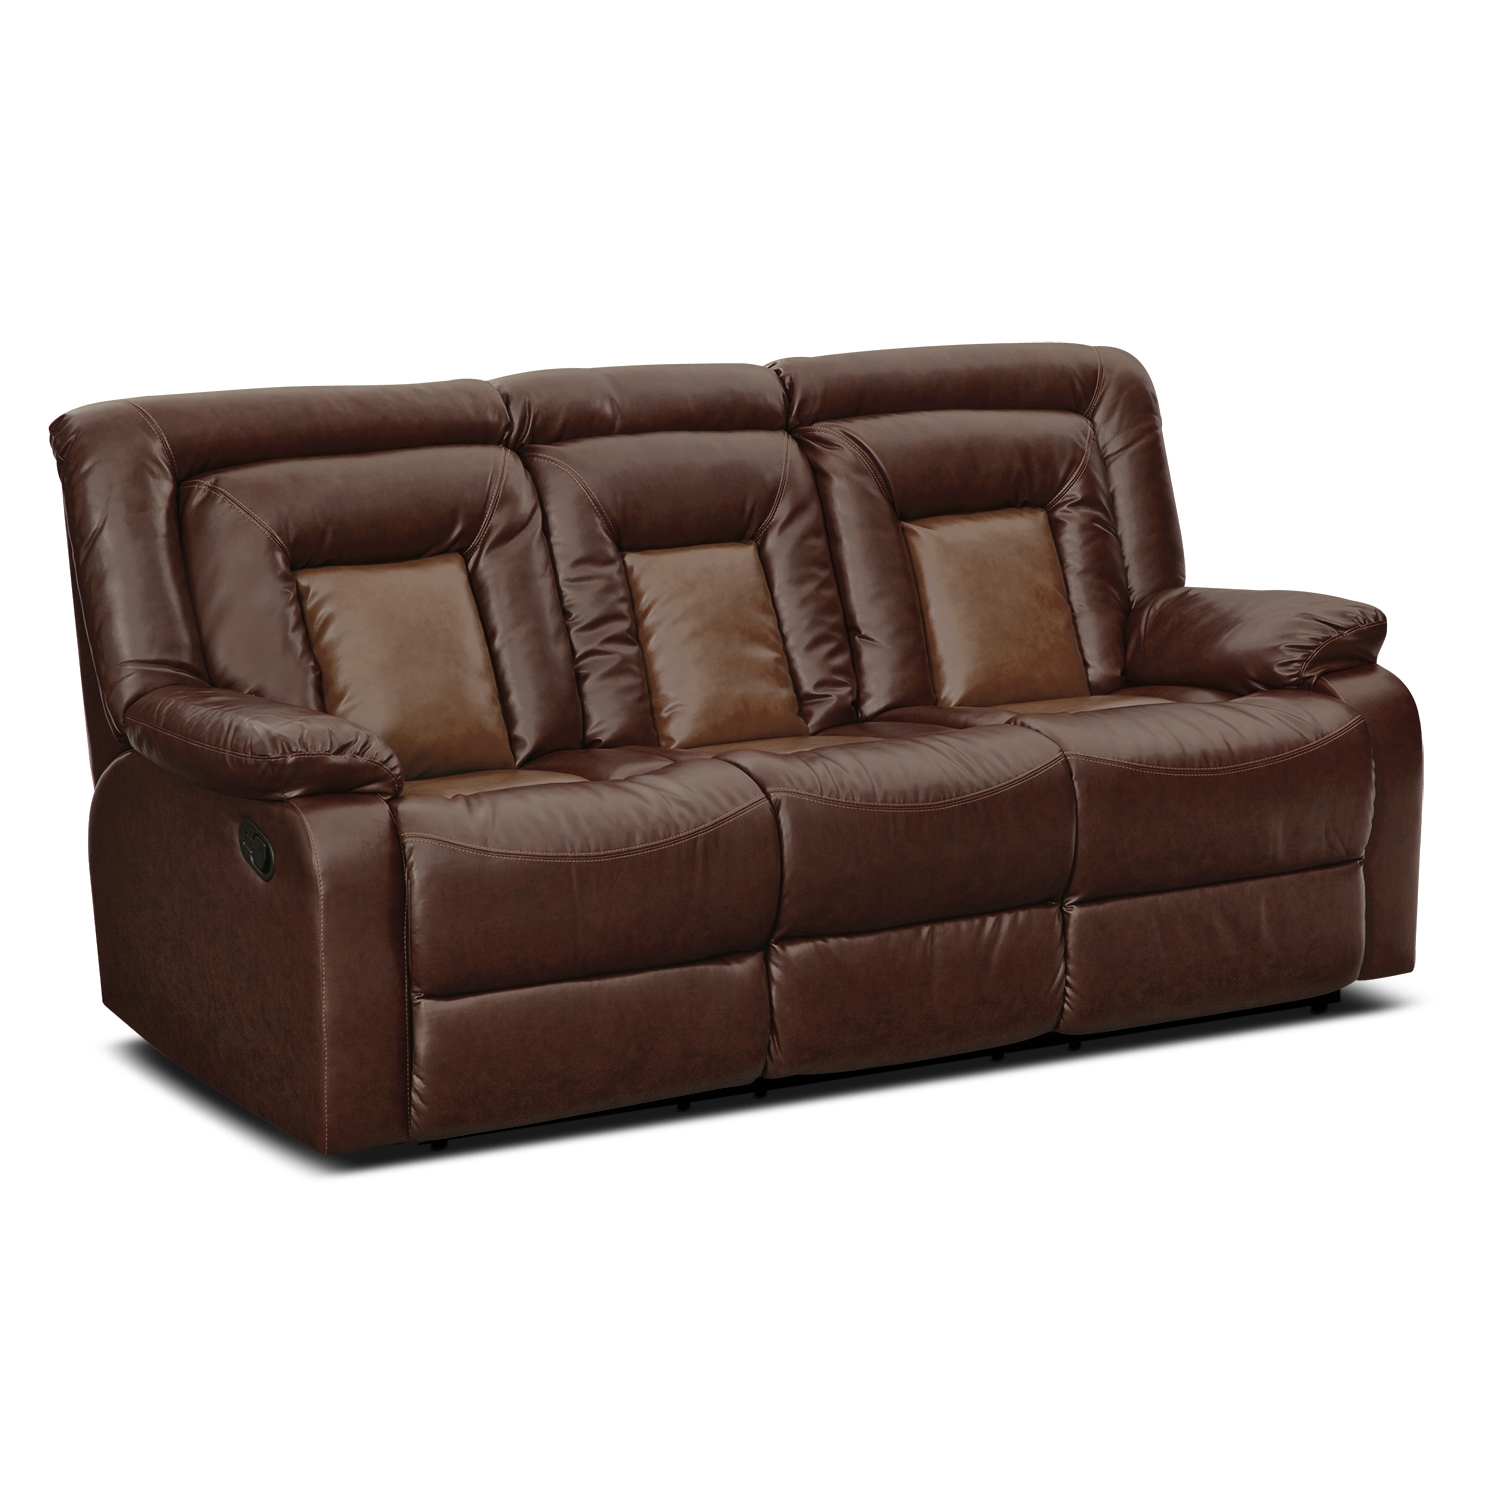 leather sectional sofa bed recliner photo - 10